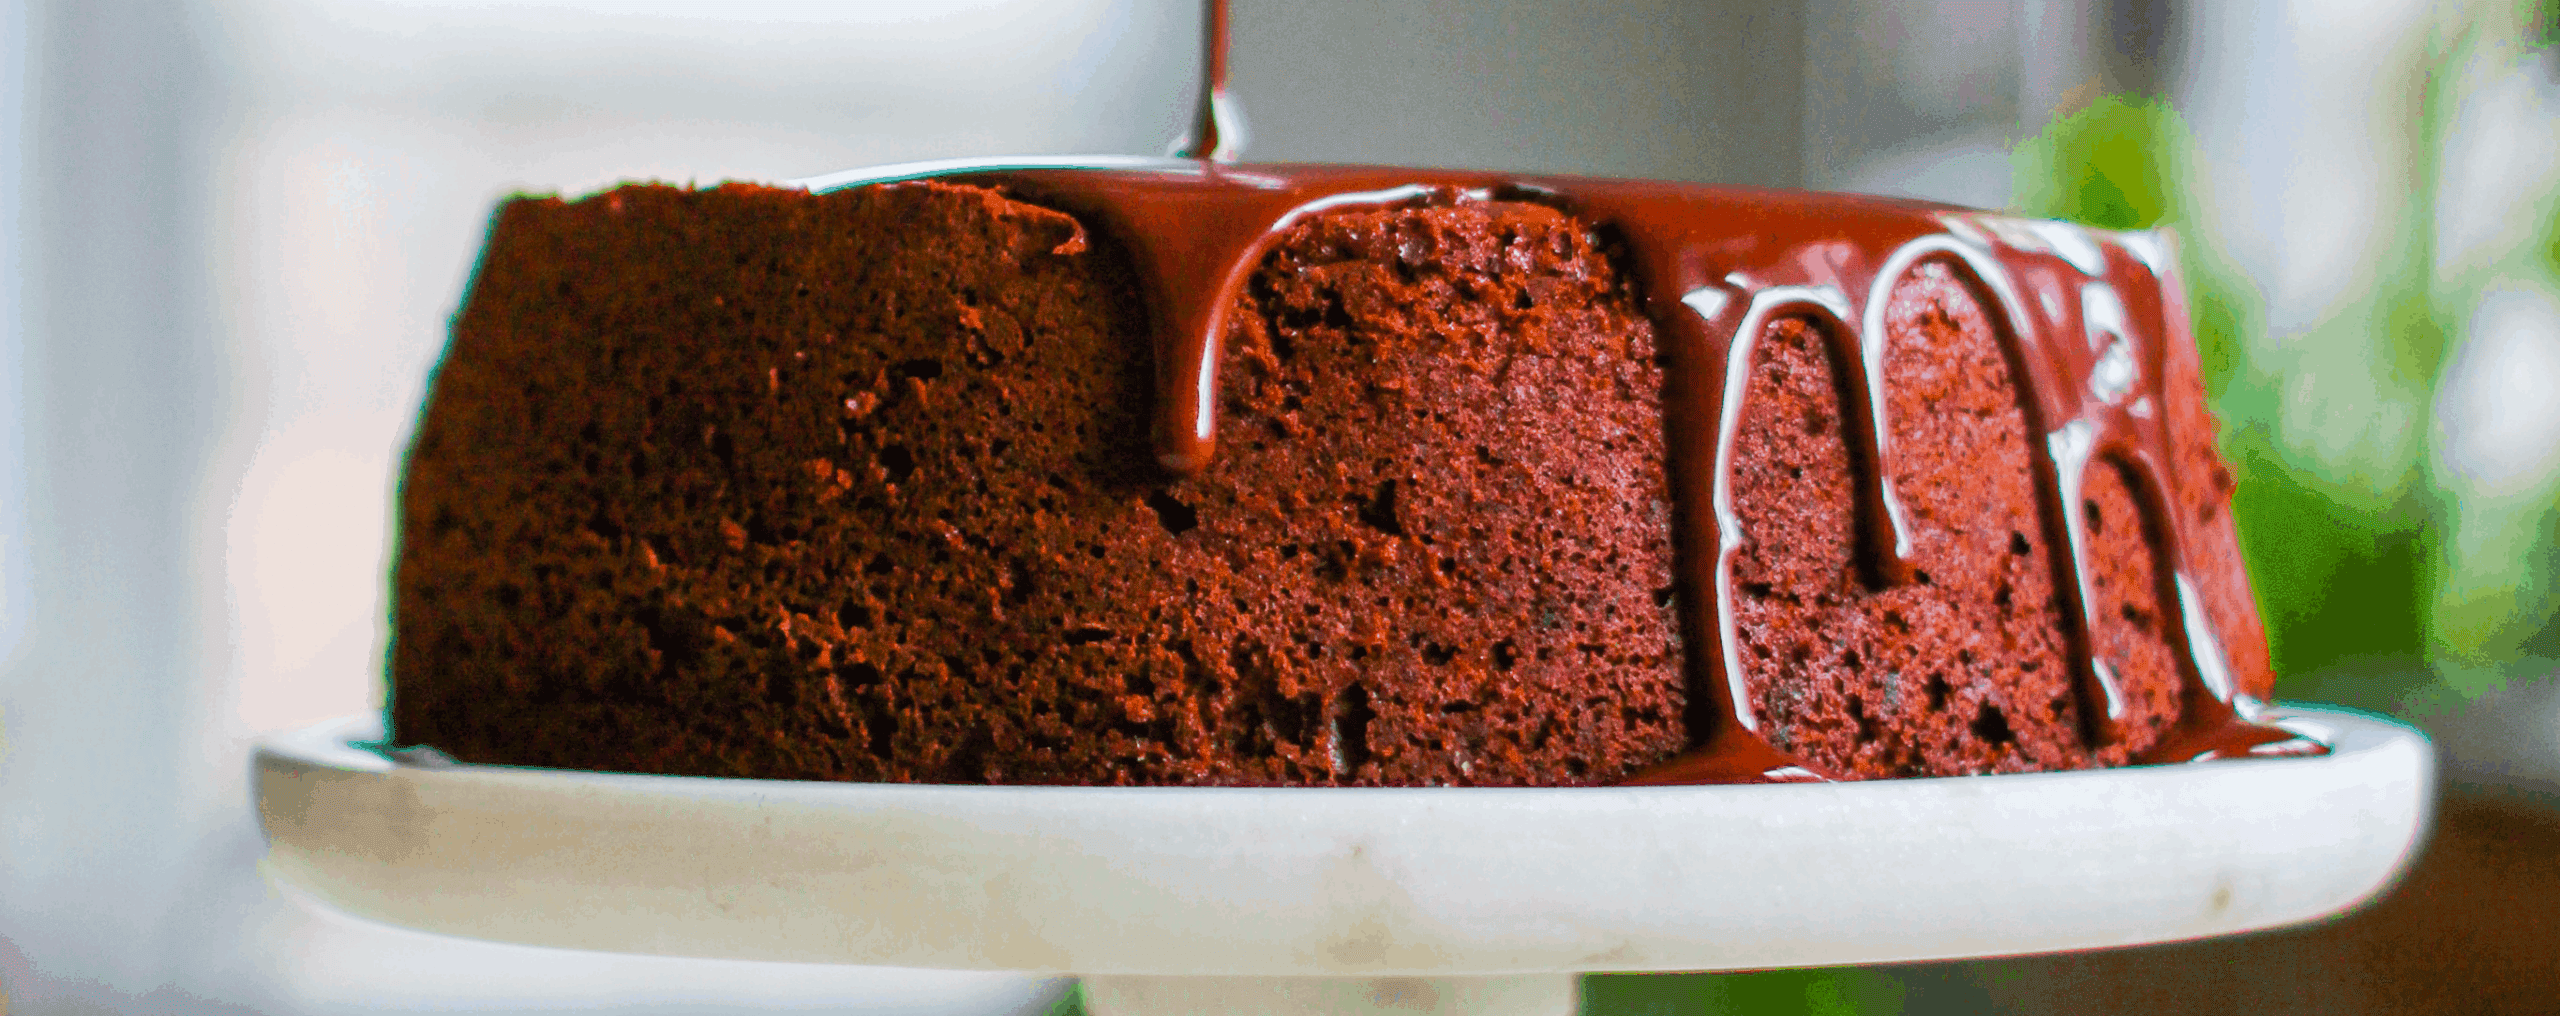 drizzling chocolate fudge on top of a chocolate cake